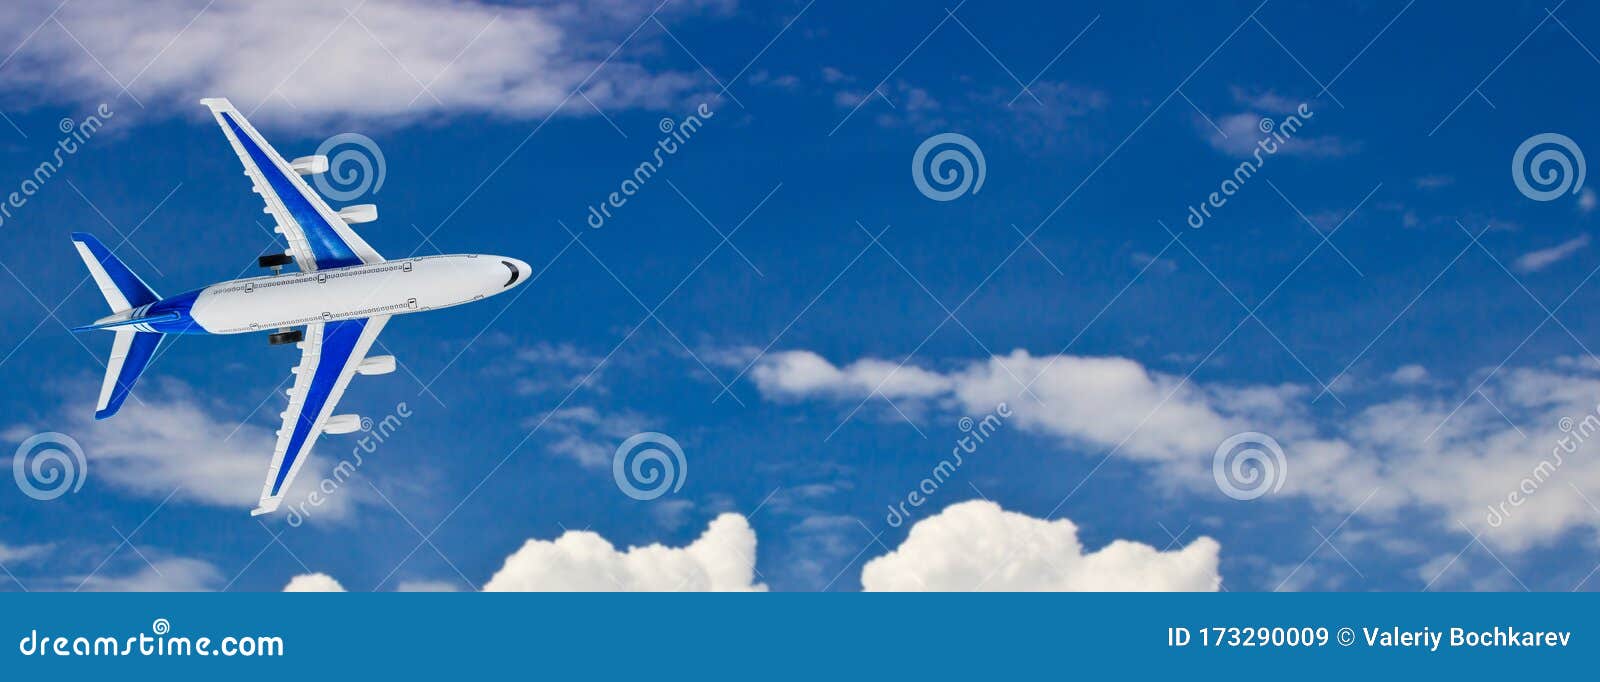 Download Model Plane Airplane On Blue Pastel Color Background Long Wide Banner Stock Image Image Of Icon Aircraft 173290009